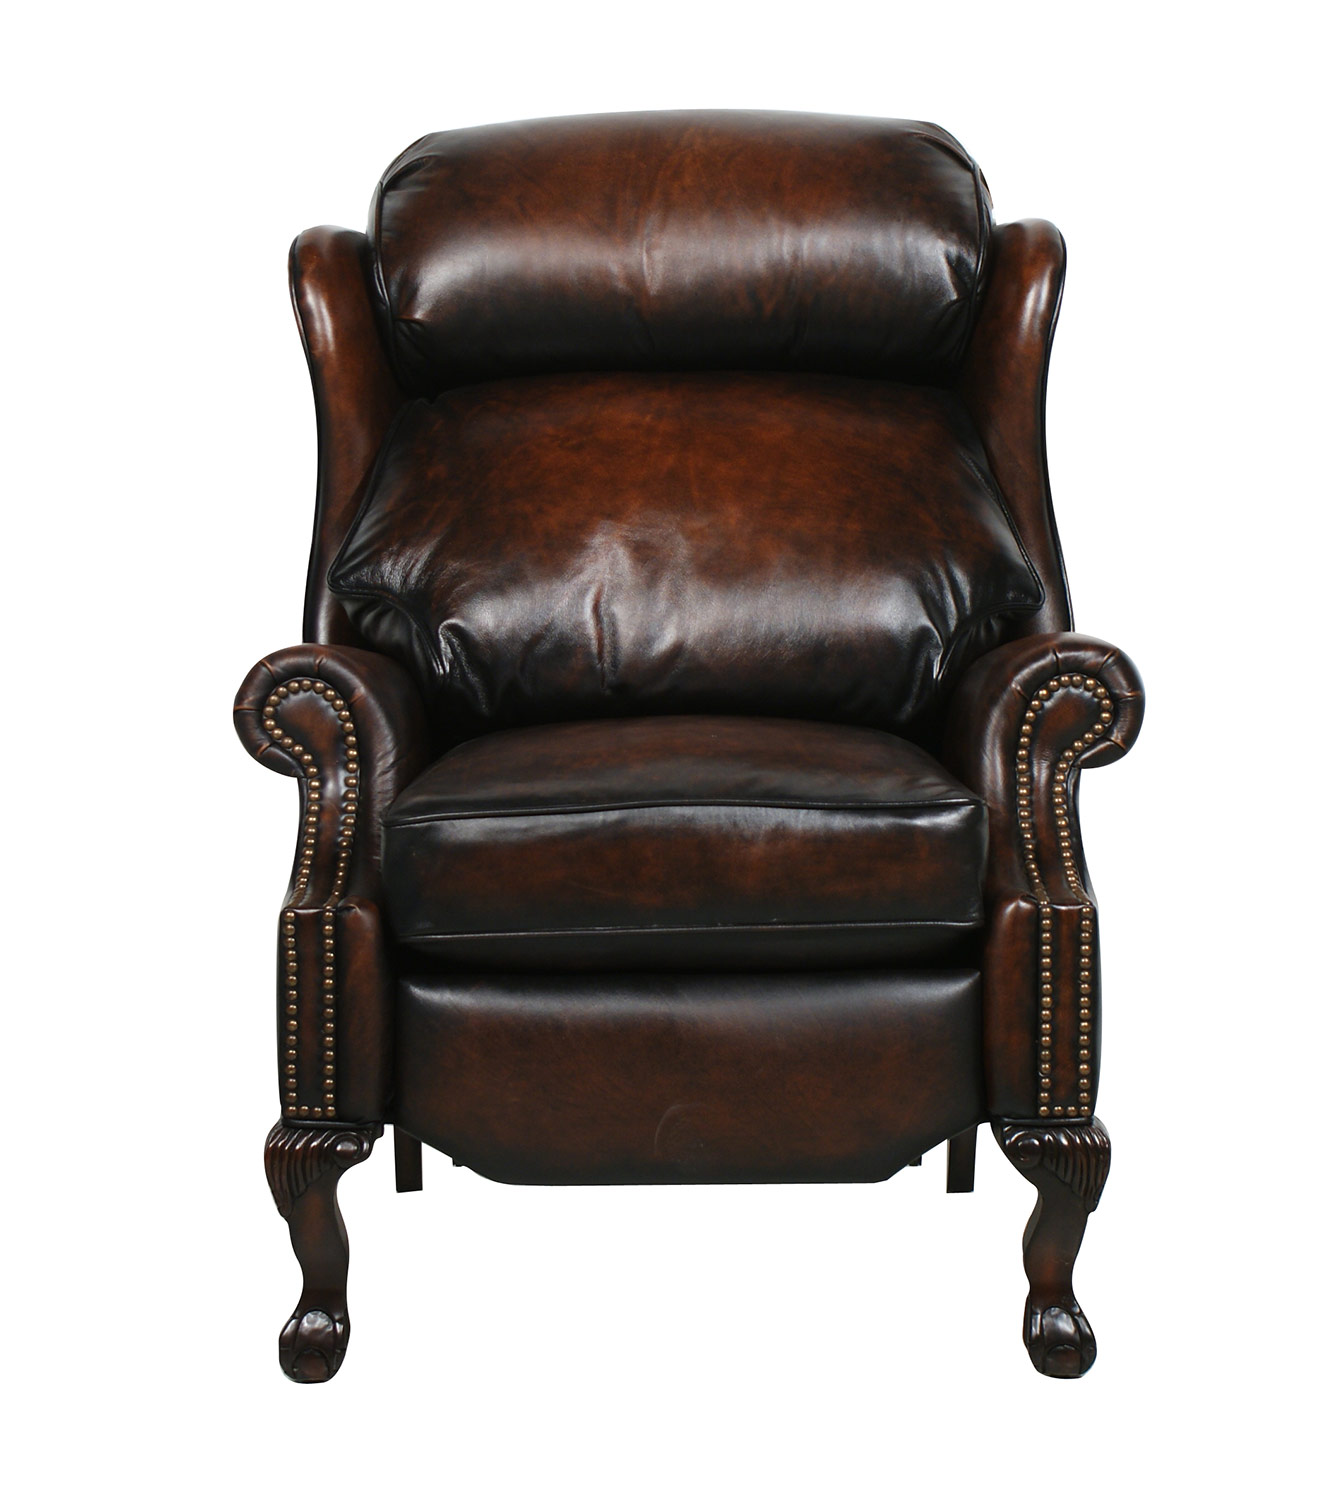 Barcalounger Danbury ll Vintage reserve Leather Recliner - Coffee